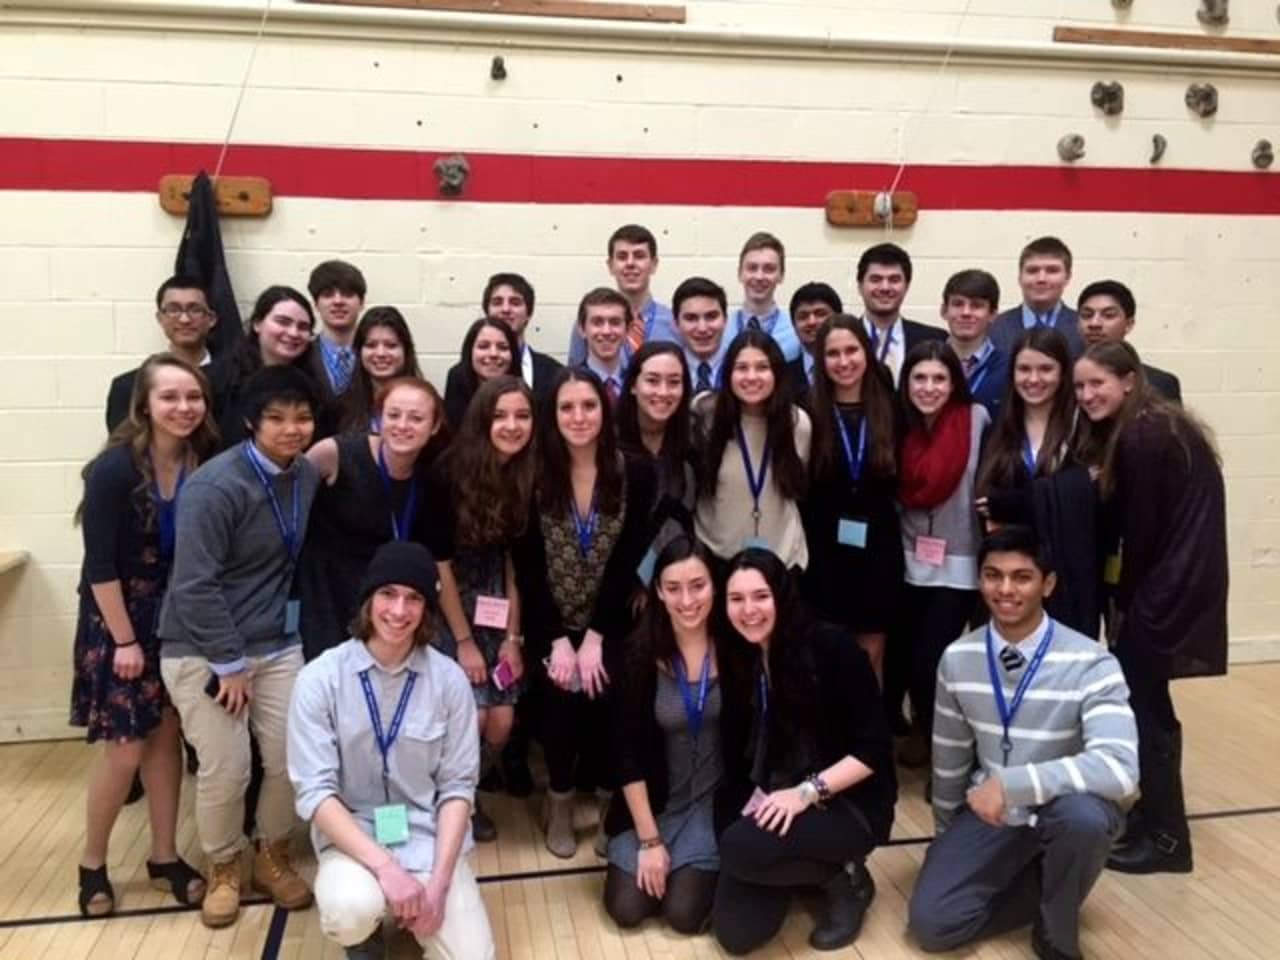 Briarcliff High School was ranked among the best high schools in the country at No. 31 by Newsweek. These science research students competed in the annual Westchester Science and Engineer Fair in the 2014-15 school year.